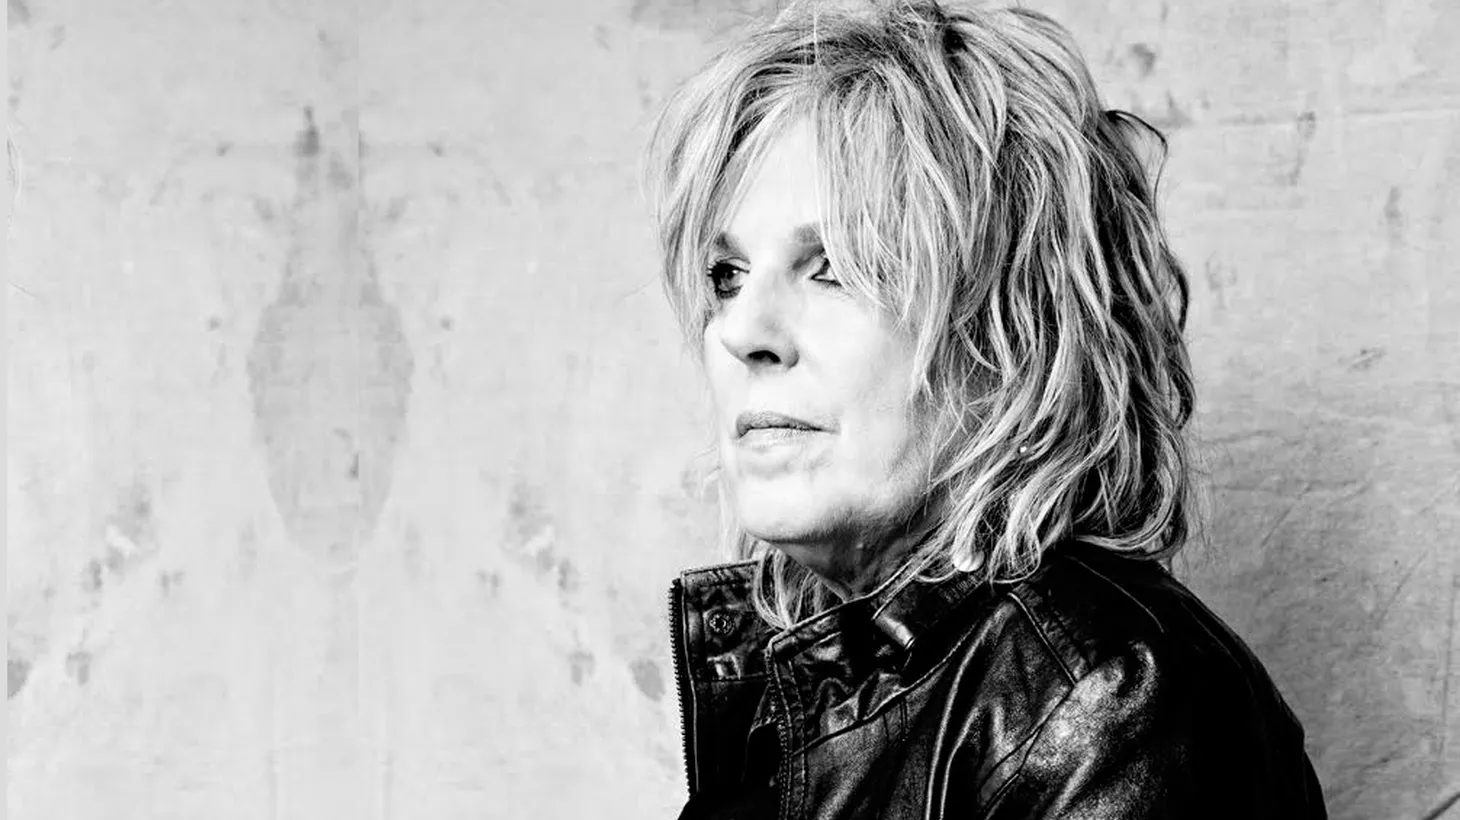 Lucinda Williams released one of the most critically acclaimed albums of her career with The Ghosts of Highway 20.